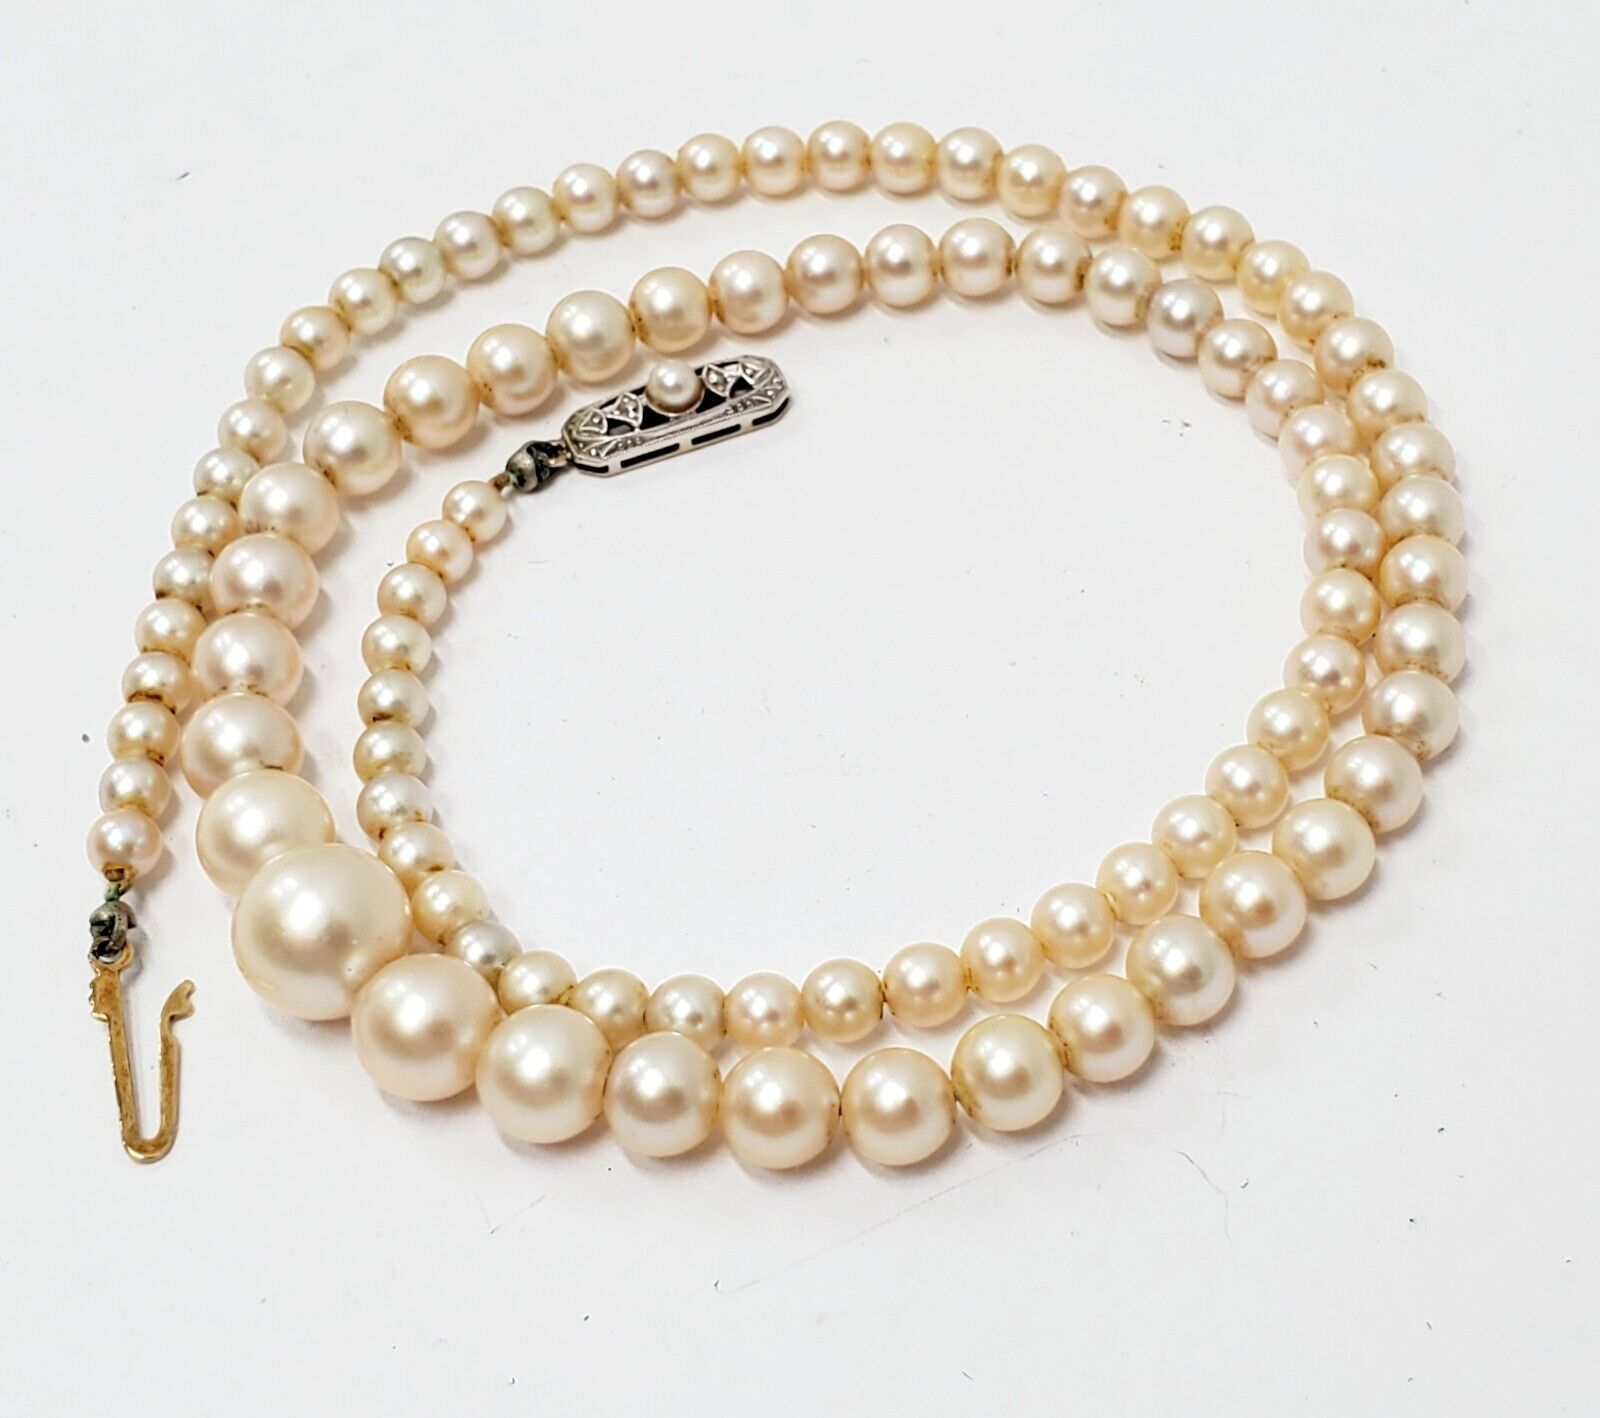 Antique Art Deco Graduated Pearl Necklace 14K 585  Gold Clasp 4-9mm Pearls 18\